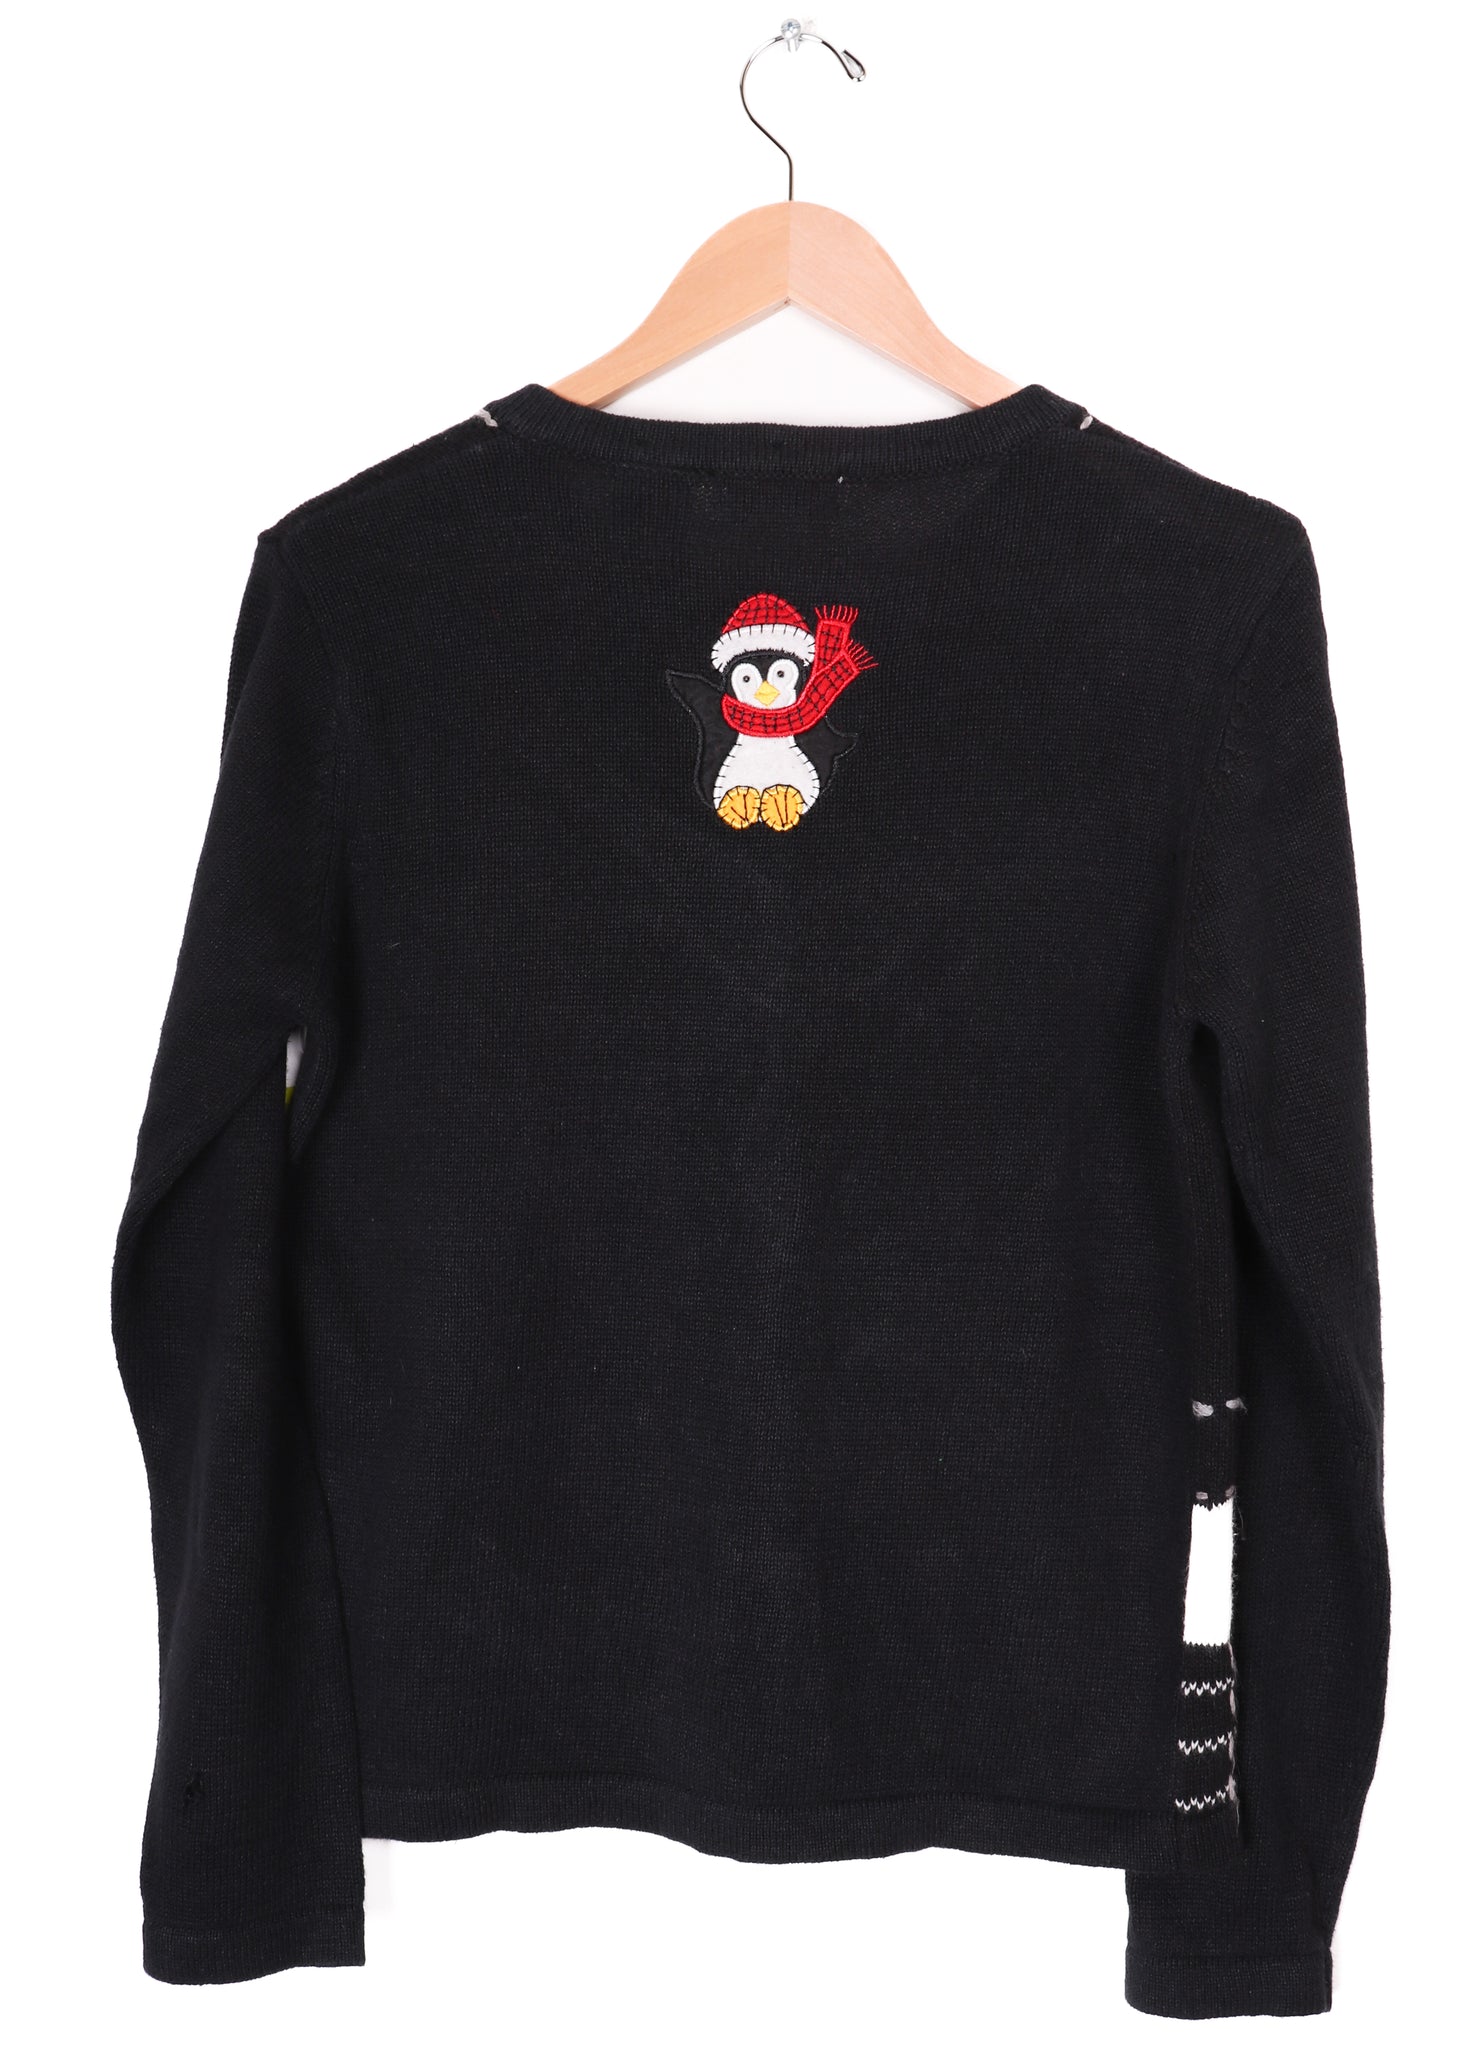 White Stag Adorable Penguins Black Sweater